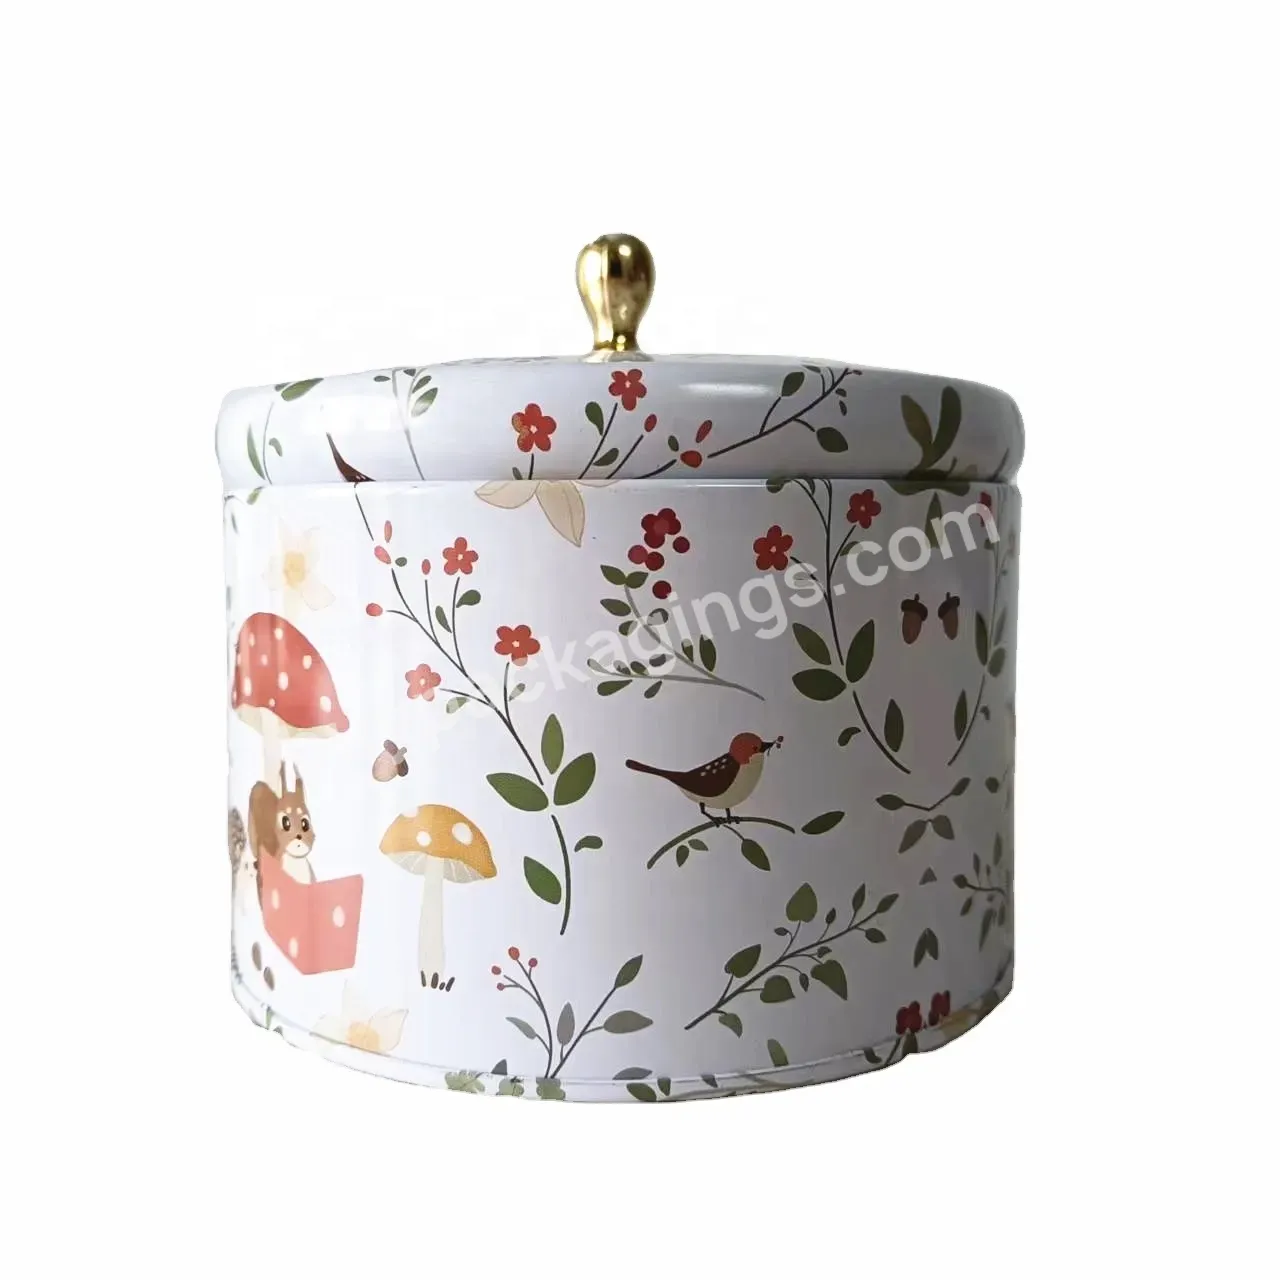 Custom Design Decorative Candle Tin Jar With Gold Knob On Lid Cover Leak Proof Printed 3 Wicks Candle Container With Domed Lid - Buy 16 Ounce Candle Jar Custom Print,350ml Candle Jar Tin Metal Candle Container,Decorative Metal Jar For Candle Wax.